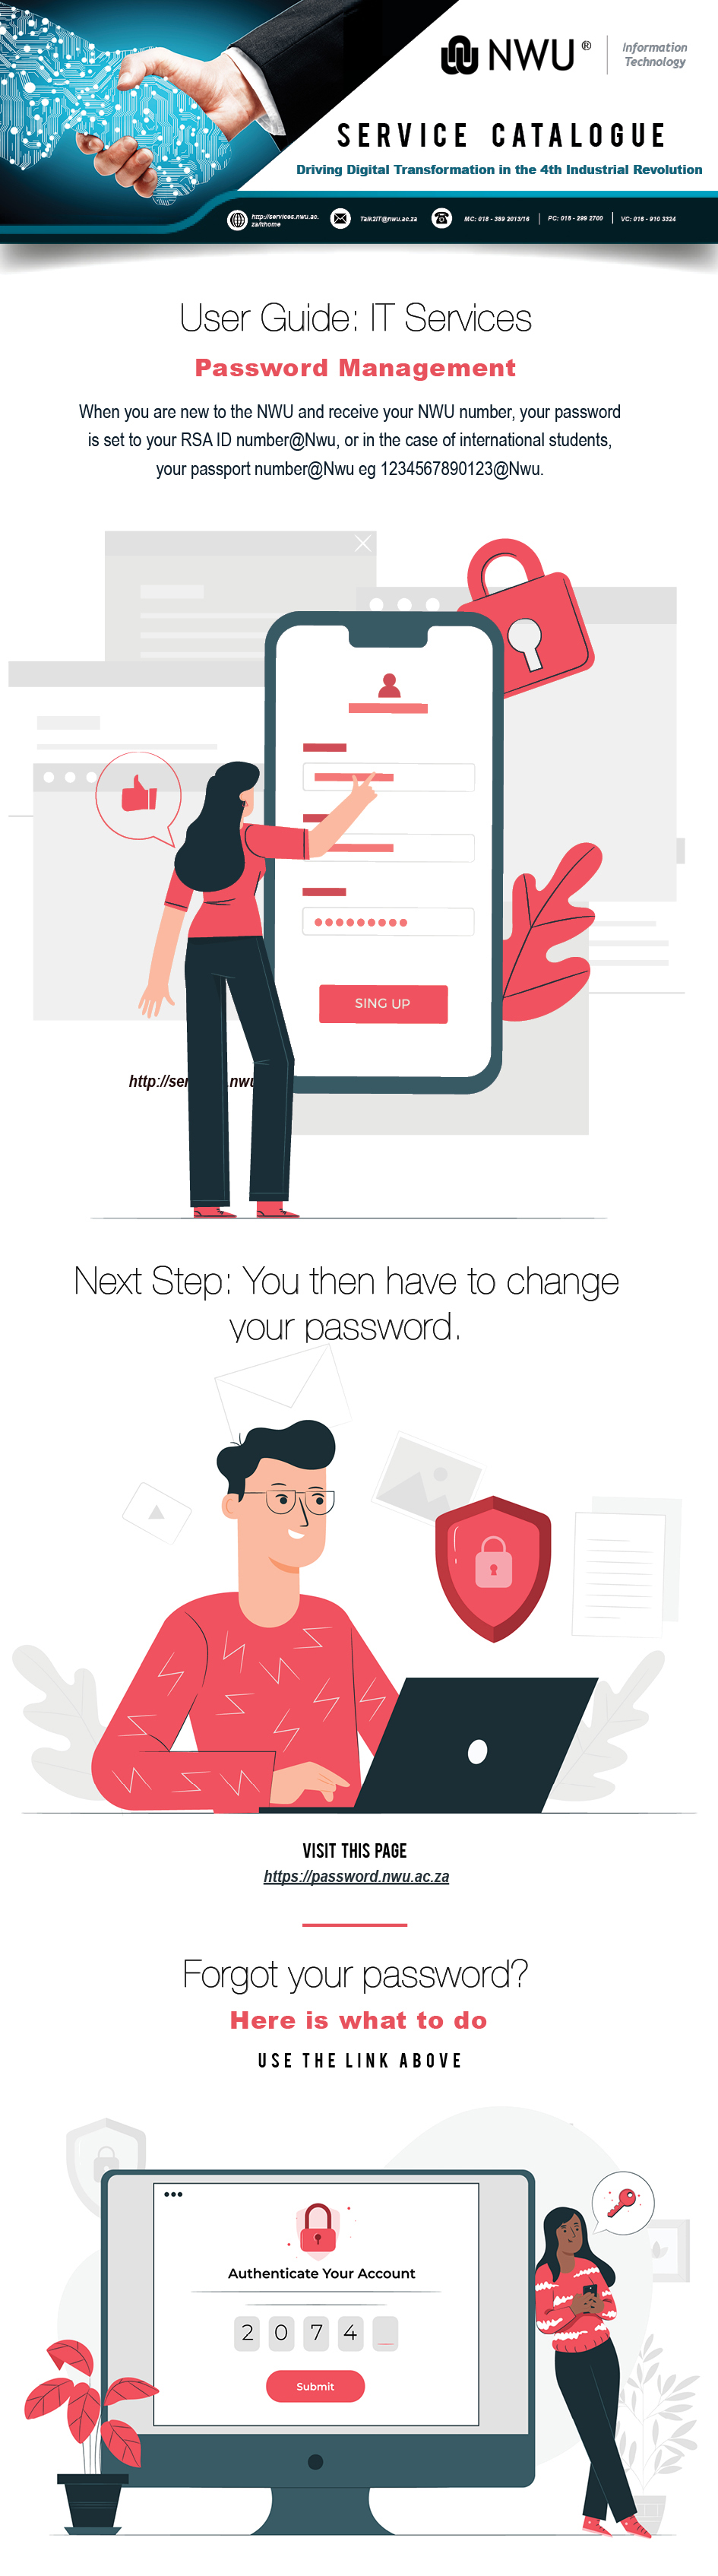 Infographic image on how to change your password